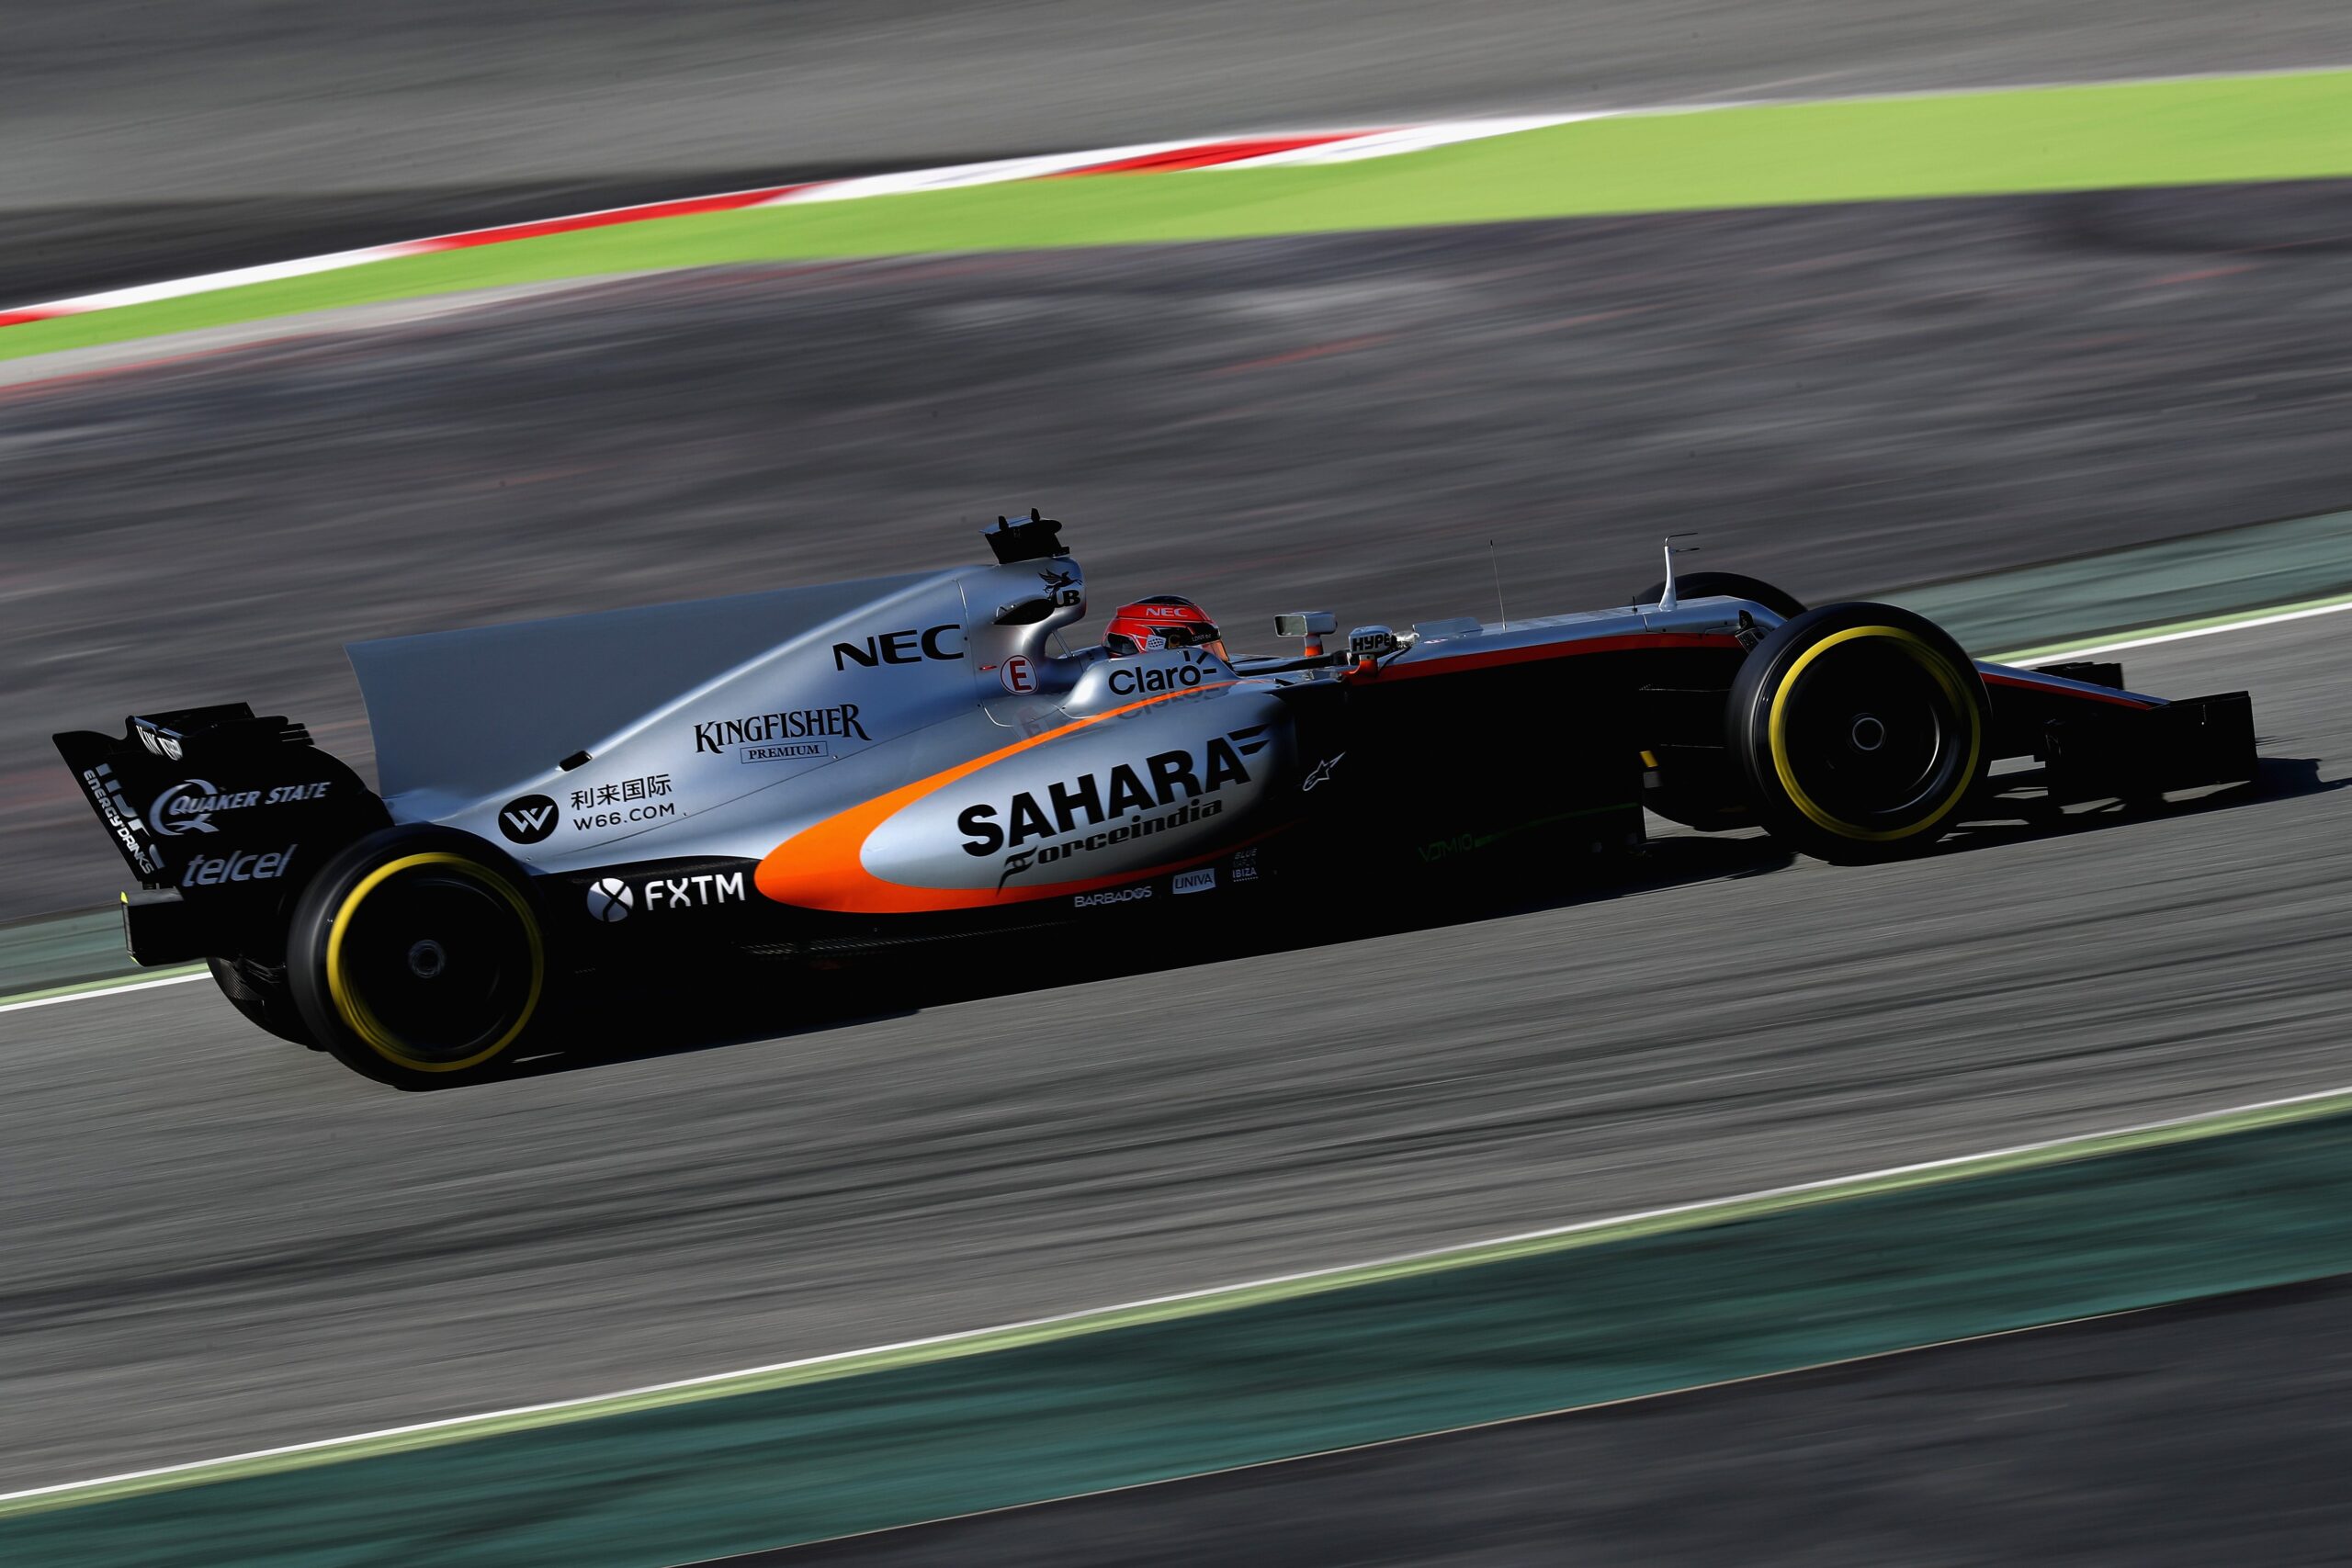 F1 Winter Testing In Barcelona – Day One